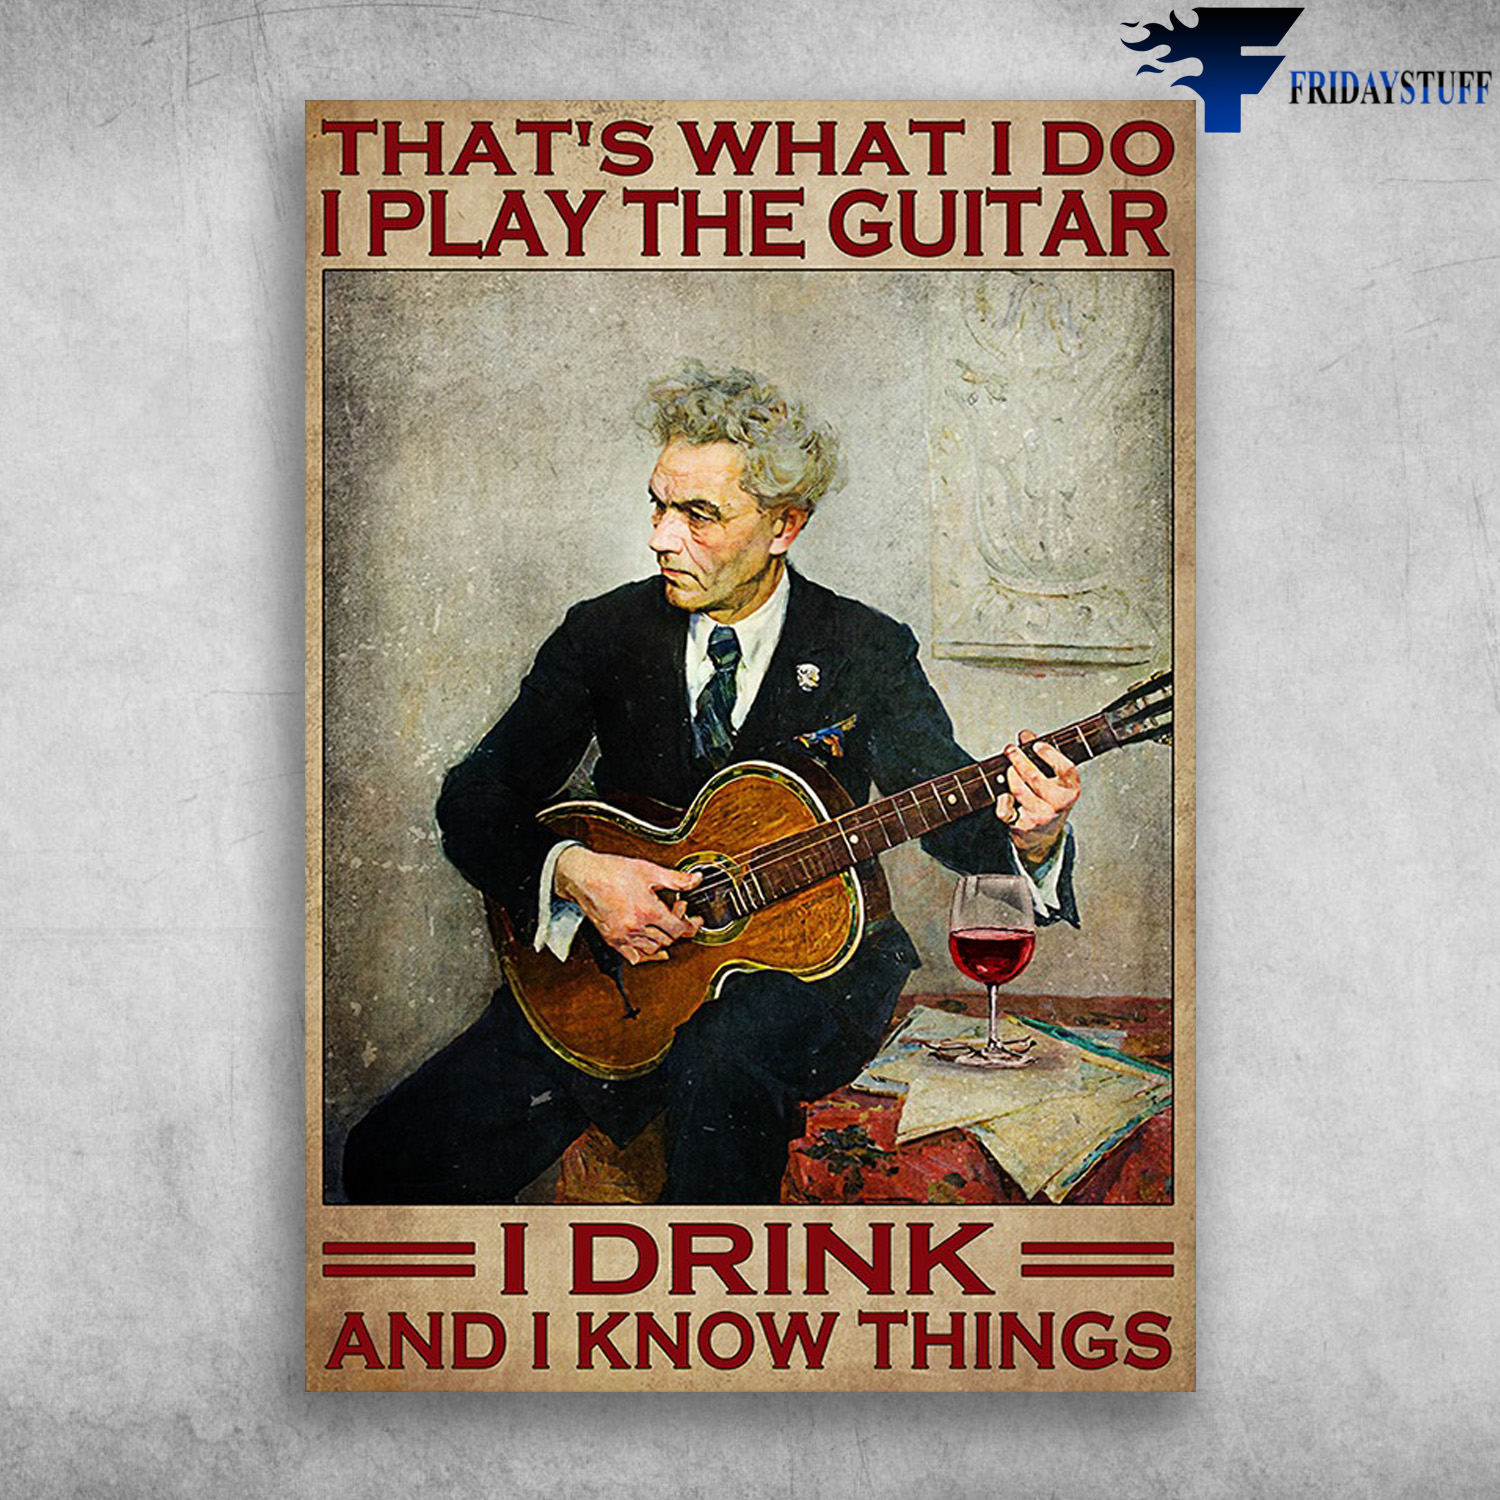 Old Man Playing Guitar - That's What I Do, I Play The Guitar, I Drink, And I Know Things